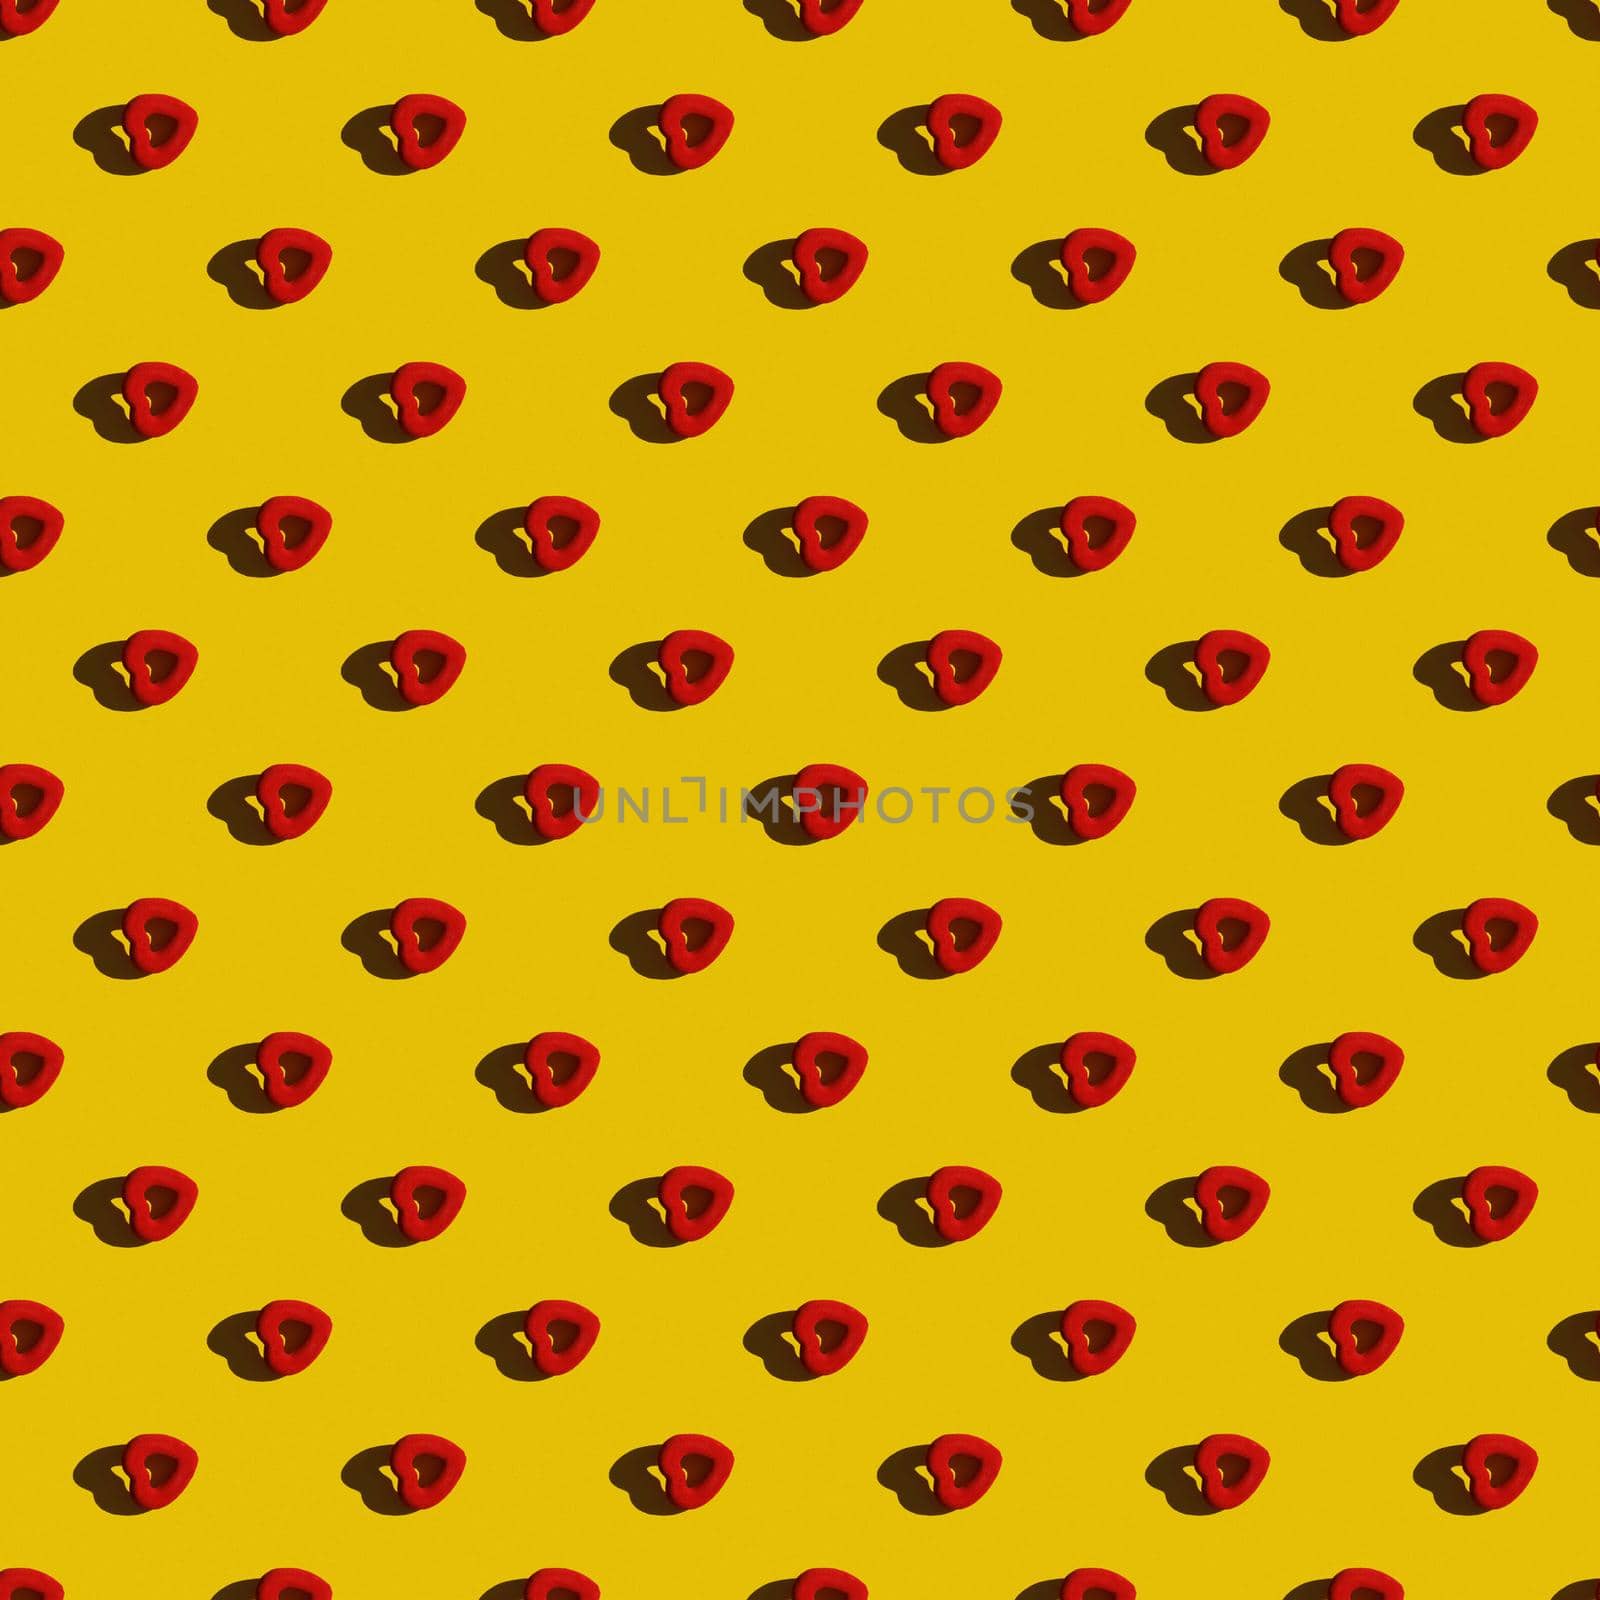 Template. Red heart in a row diagonally on a yellow background by Yurich32